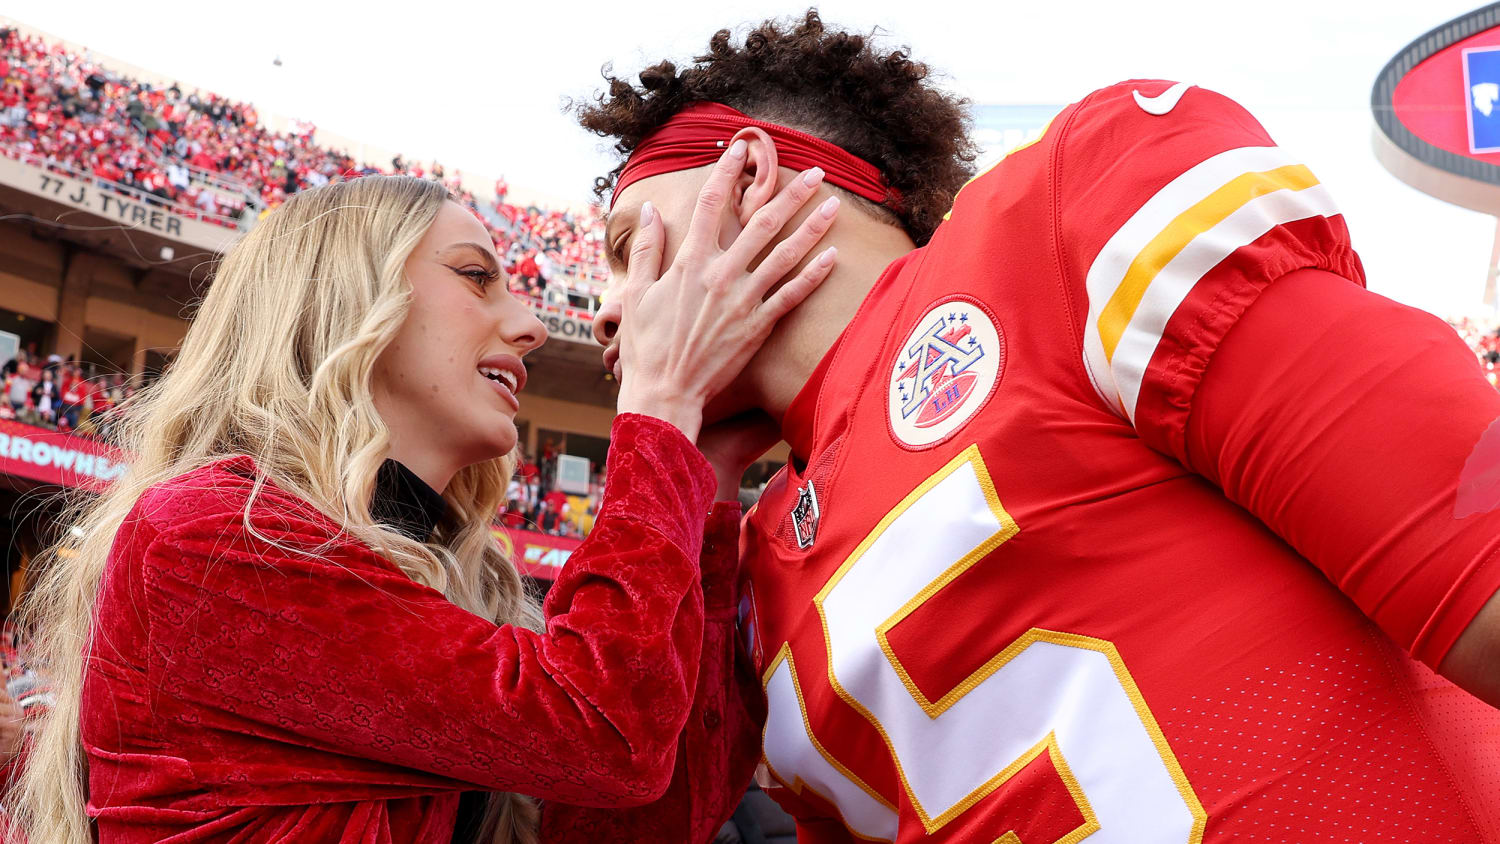 Brittany Mahomes Shares Adorable & Smiling Photos of Her Daughter Sterling:  'You Are Perfect